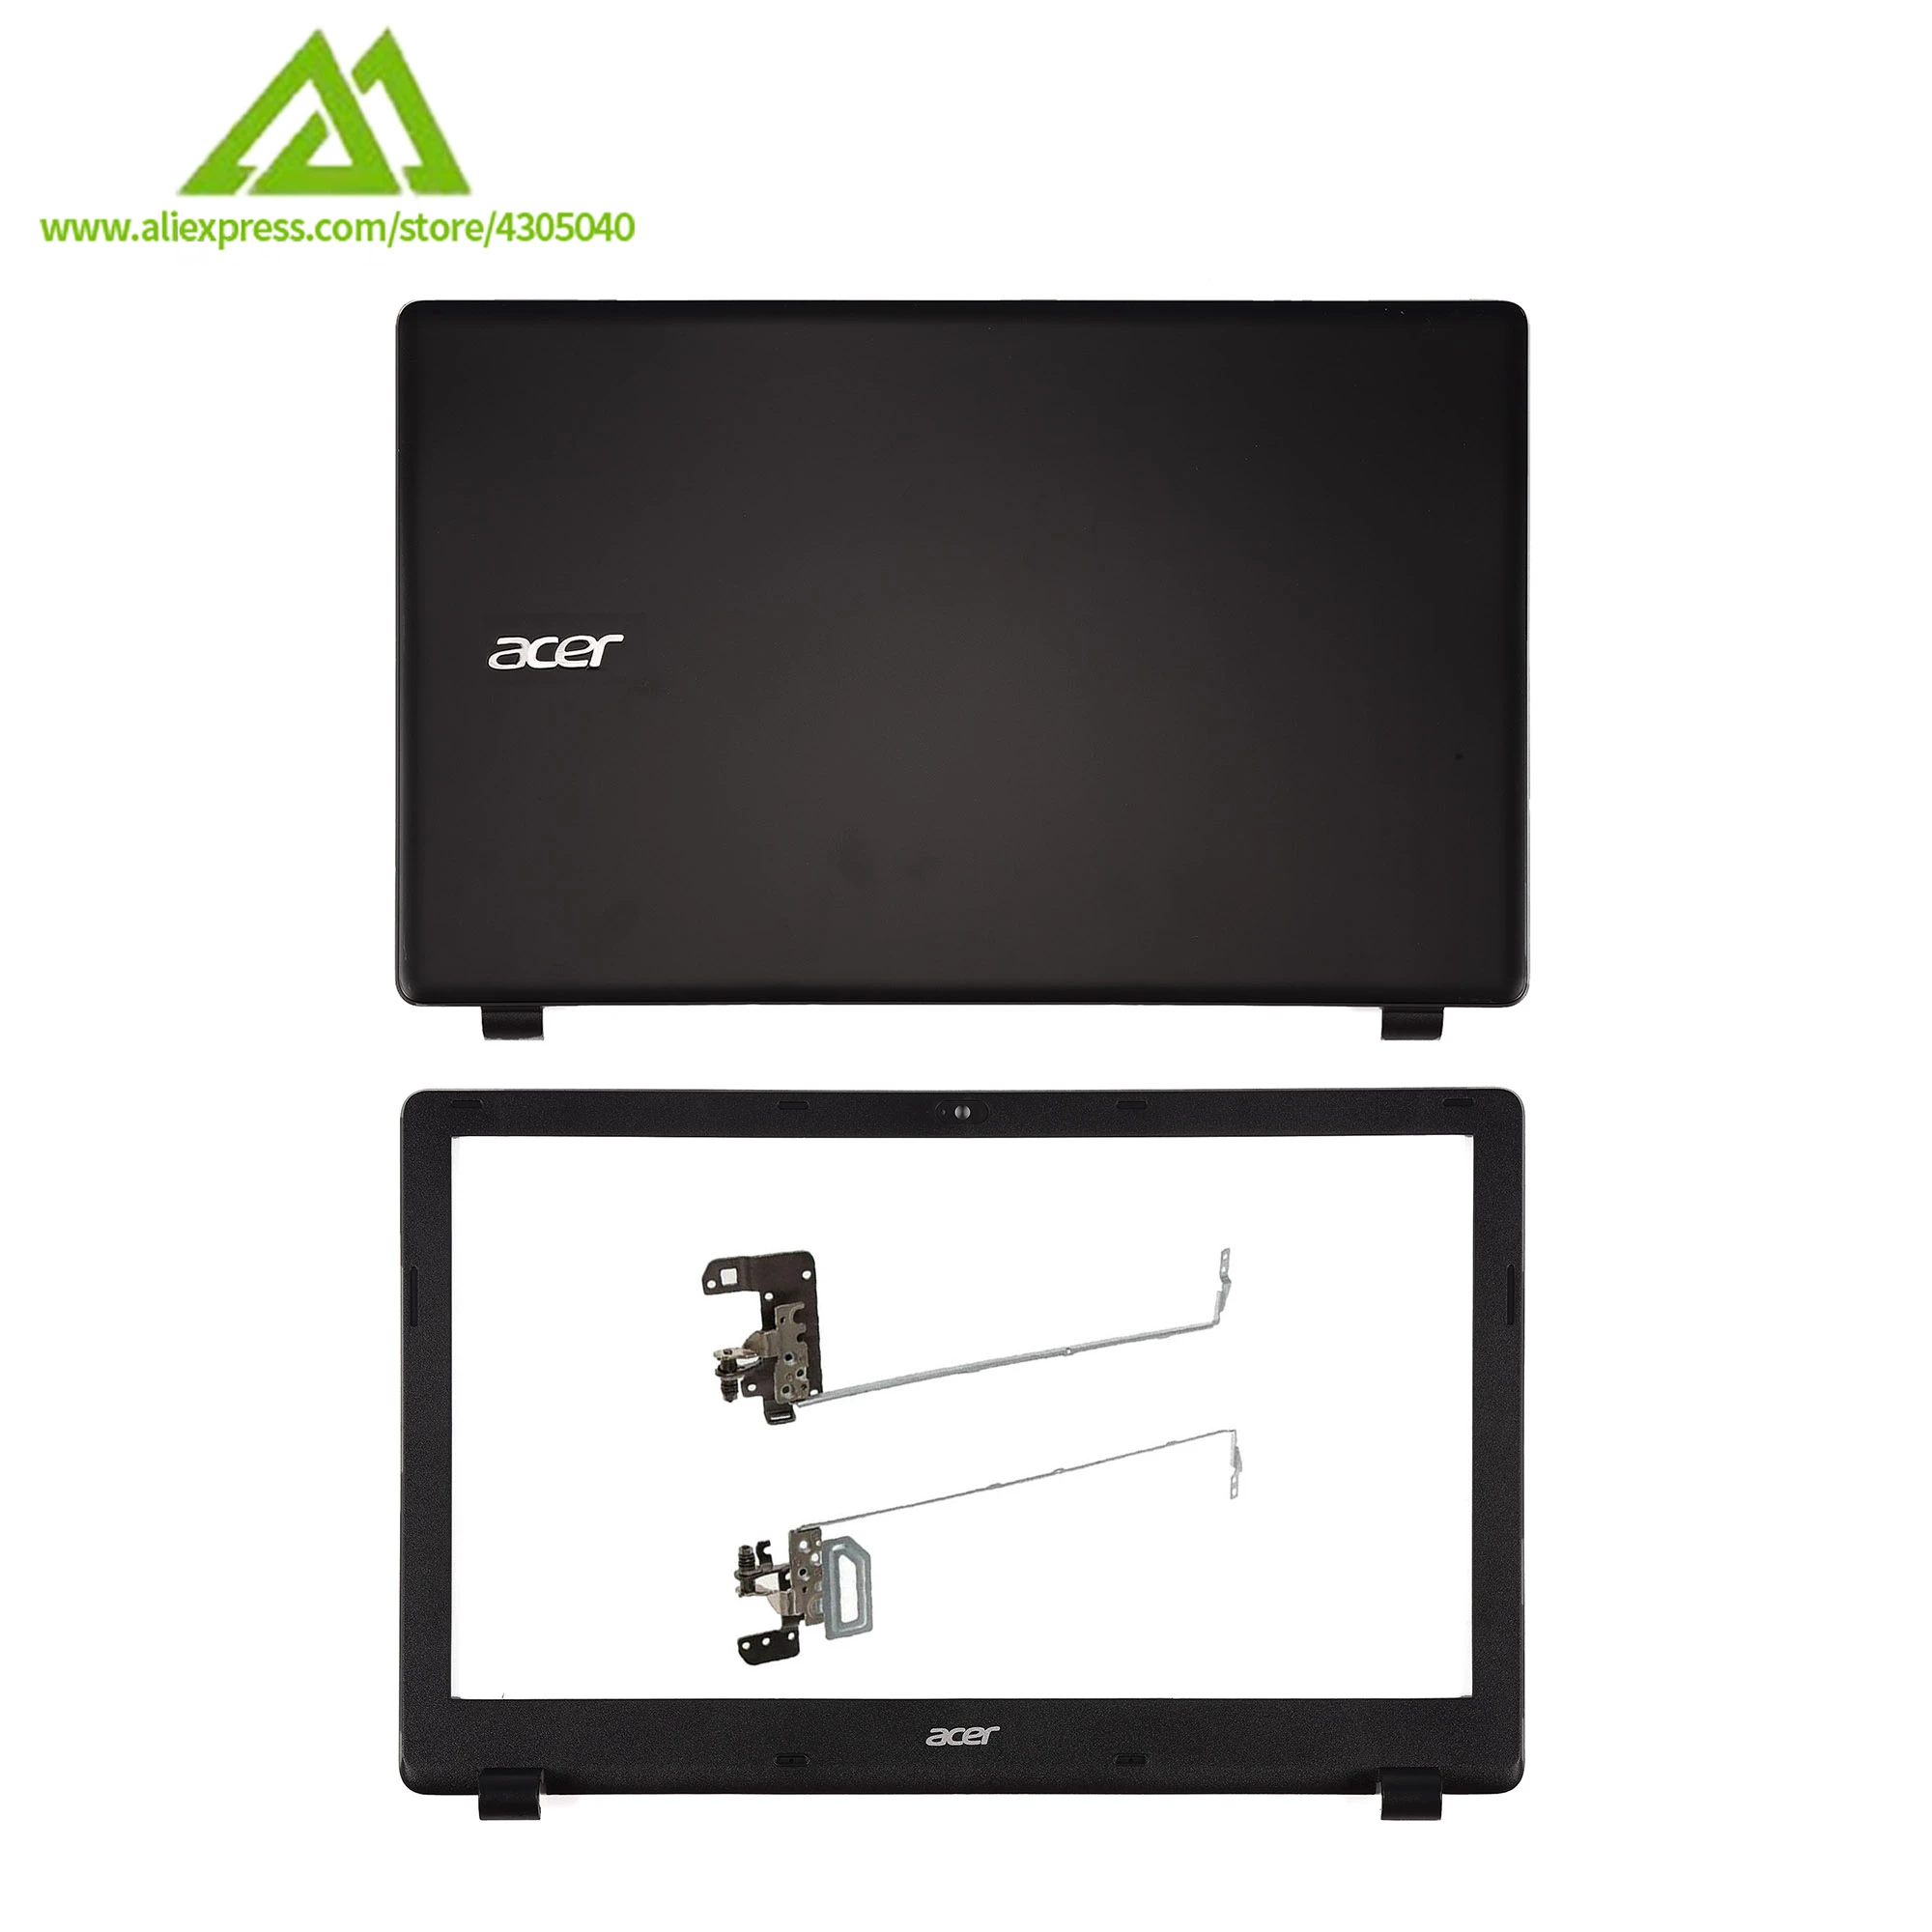 New Laptop Cover For ACER E5-571 E5-551 E5-521 E5-511 E5-511G E5-551G E5-571G E5-531 LCD Back Cover/LCD Front Bezel/Hinges 11.6 inch laptop case